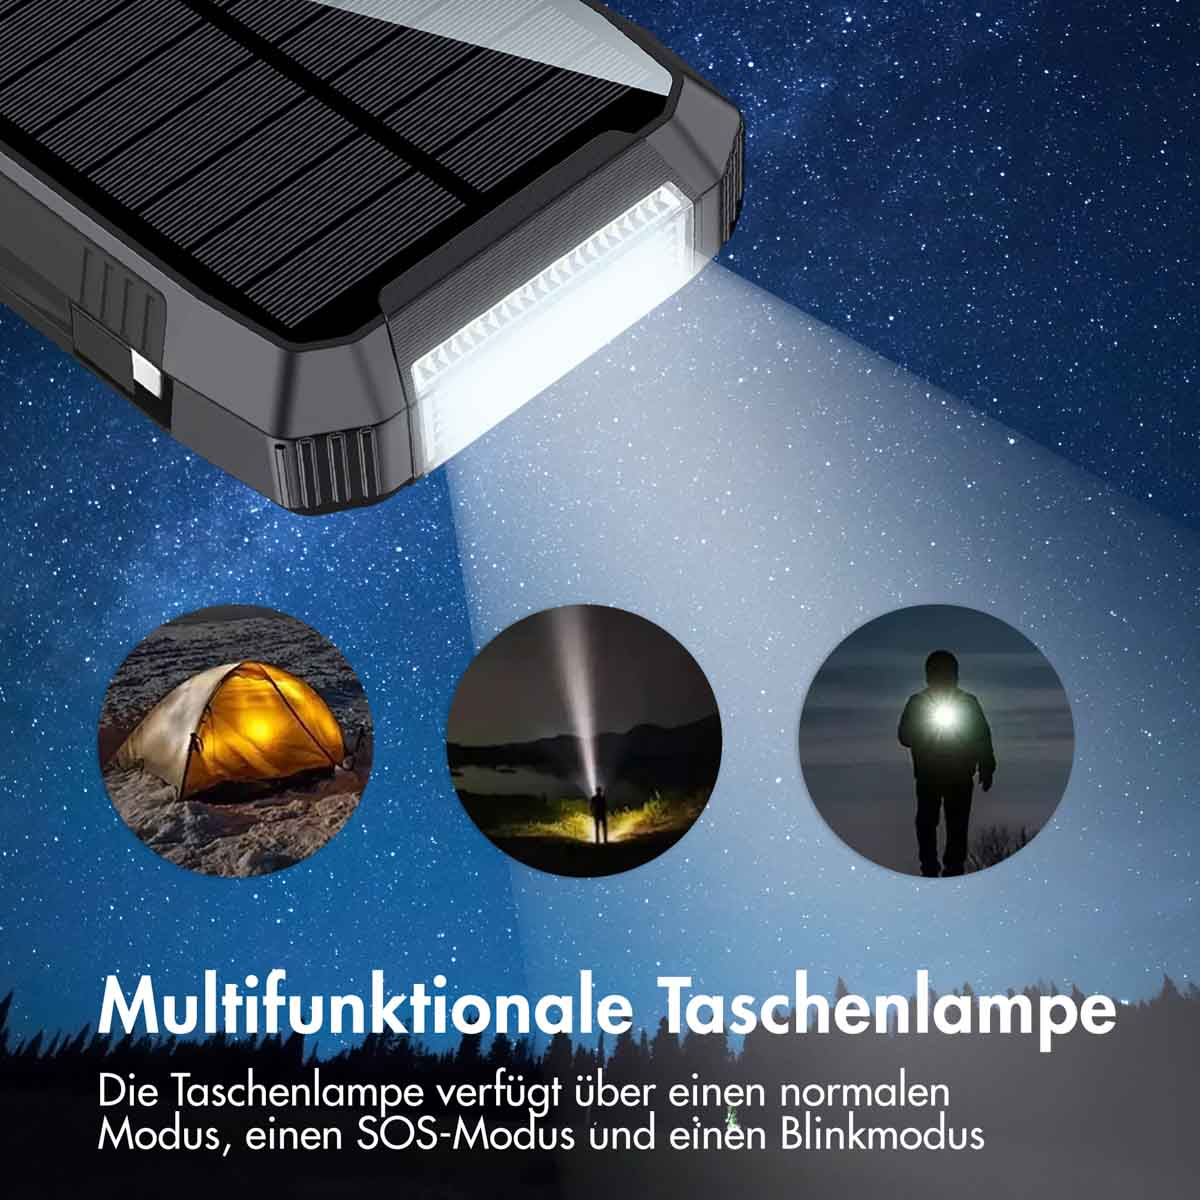 Charge Delivery Power 30000 Powerbank Schwarz IMOSHION Quick Solar mAh &